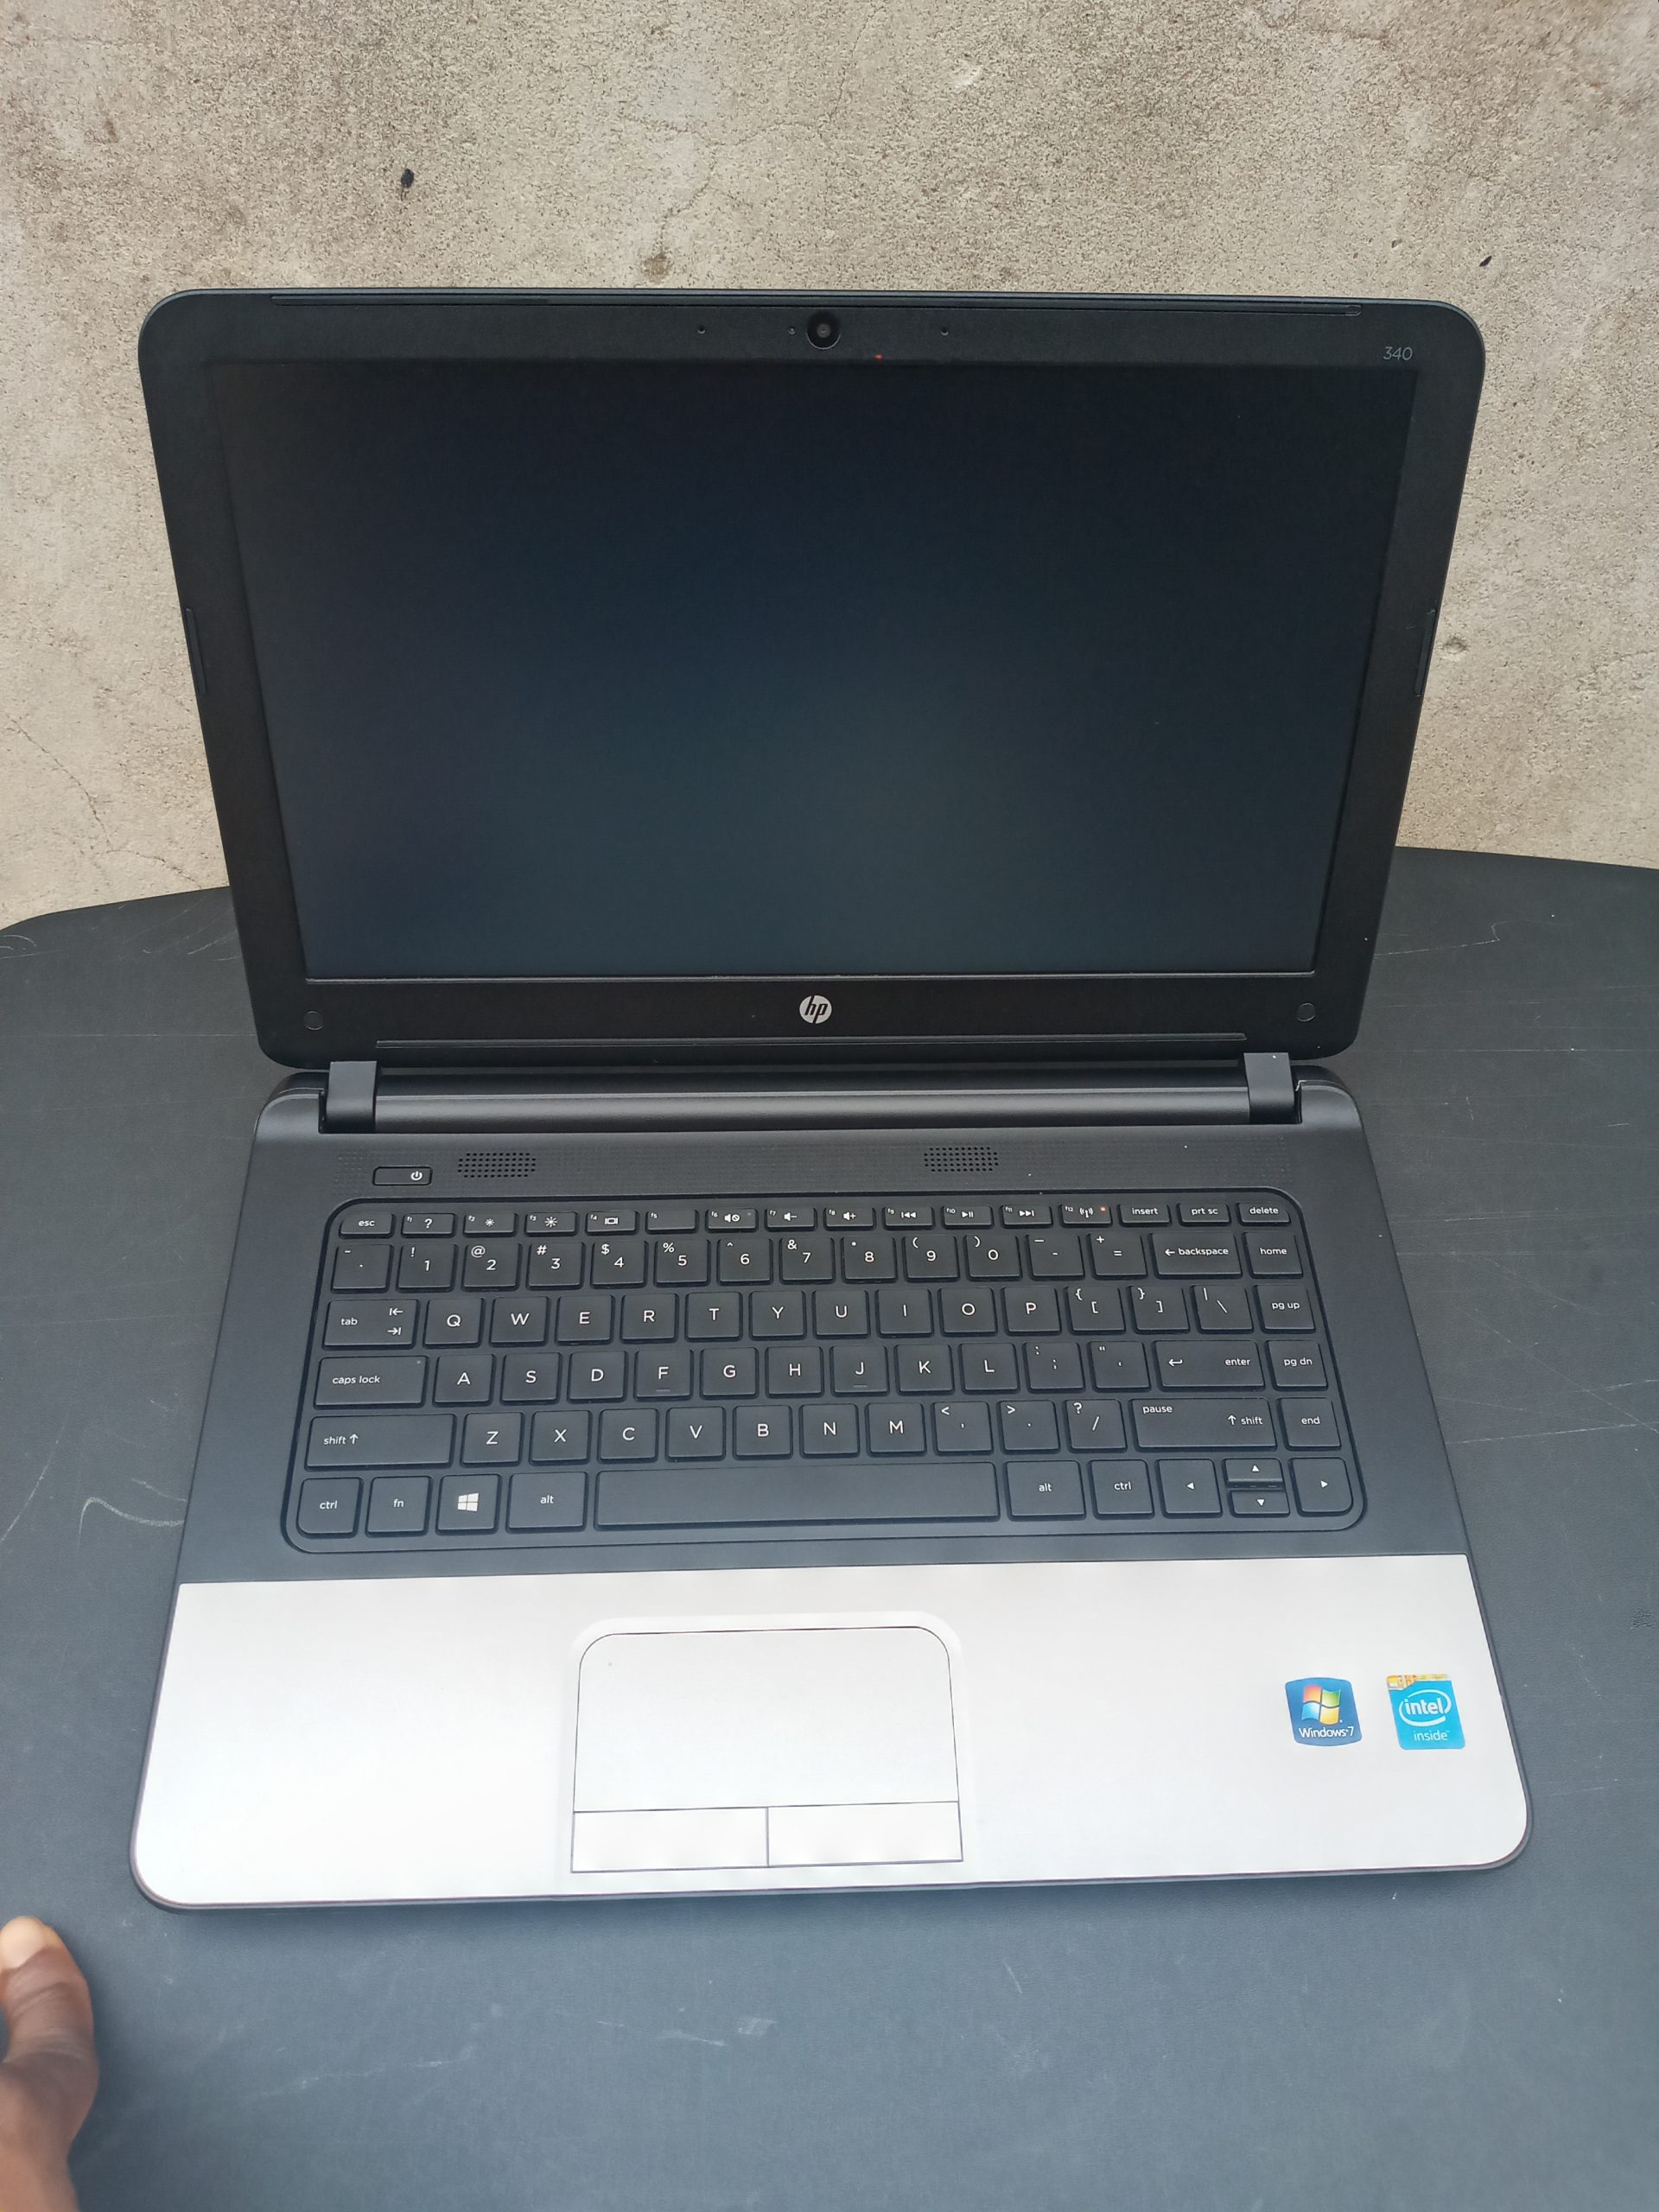 hp 840 PROBOOK 348 G2 4TH generation for sale in lagos nigeria, uk used laptops for sale , laptop for sale, latest price for used laptops in lagos nigeria, price for used hp 840 g3 g3 in lagos , affordable HP 840 g3 g3 FOR SALE in lagos, laptop whole sale shop in lagos , whole sale laptop warehouse in lagos, laptop warehouse in ikeja computer village, laptop ware house in nigeria laptop ware house for hp 840 PROBOOK 348 G2 g3,